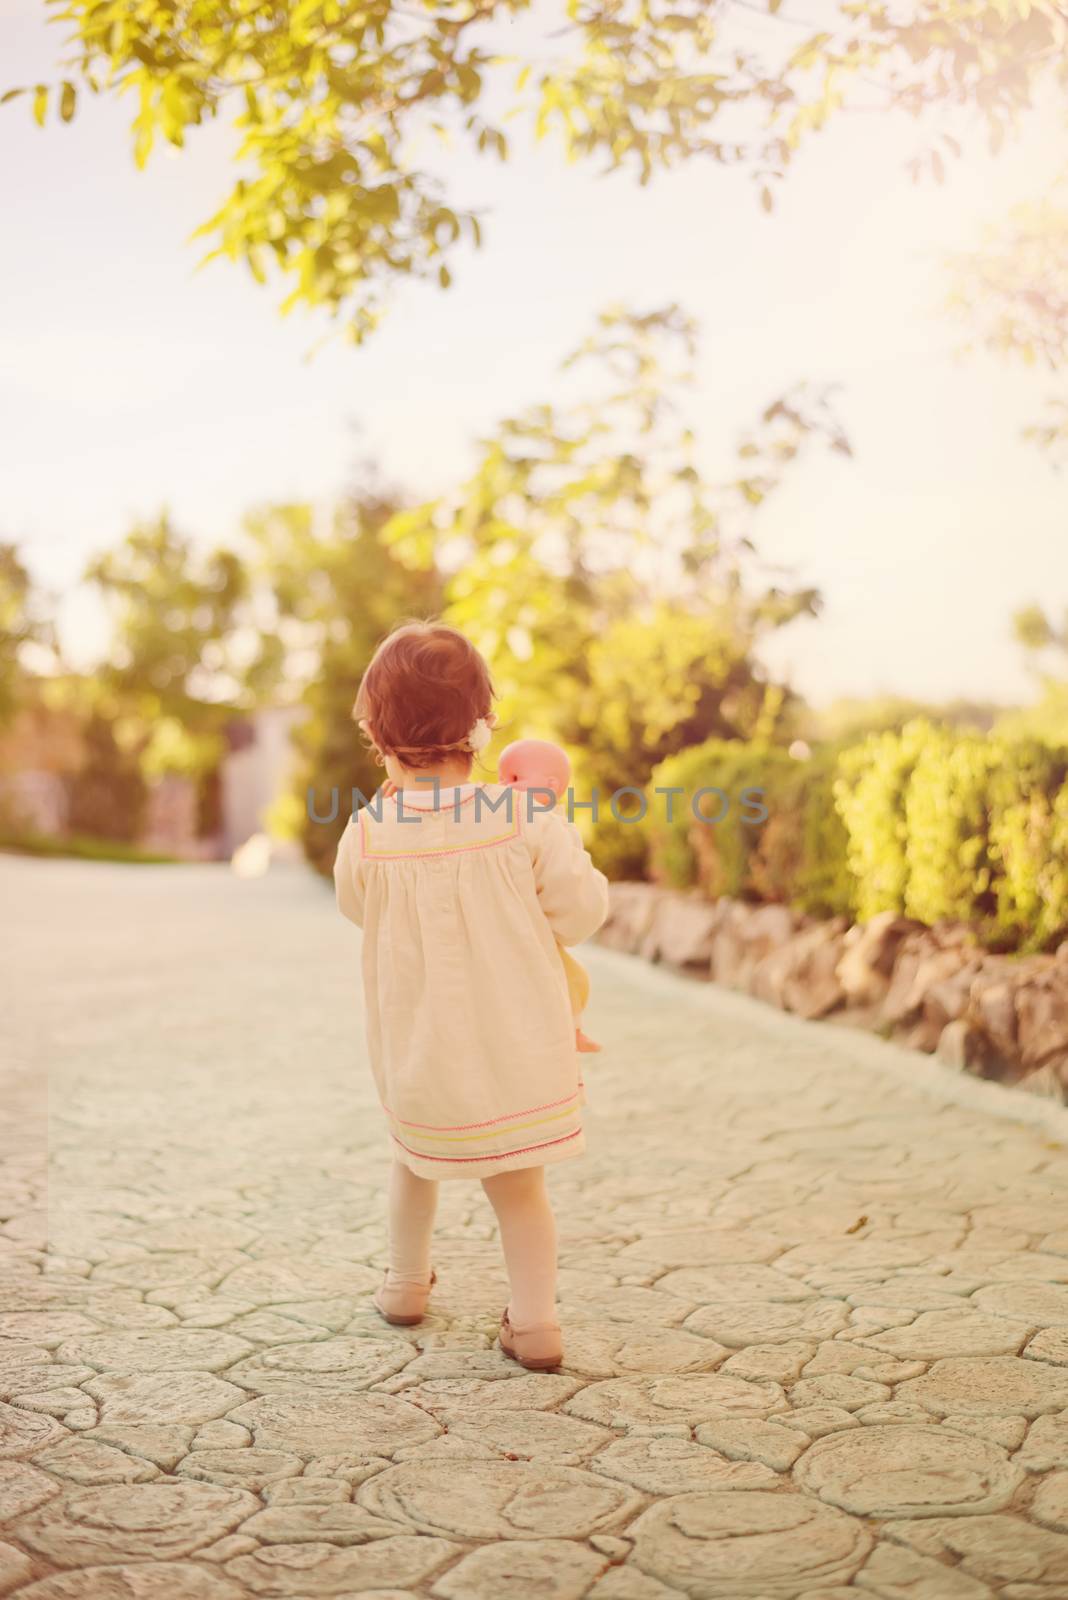 Toddler girl in the back, dressed in a bright dress with a wreath of flowers on his head and holding a doll. Little girl walking down an stone alley in a garden with flowers and trees. Sun, sun haze, glare.